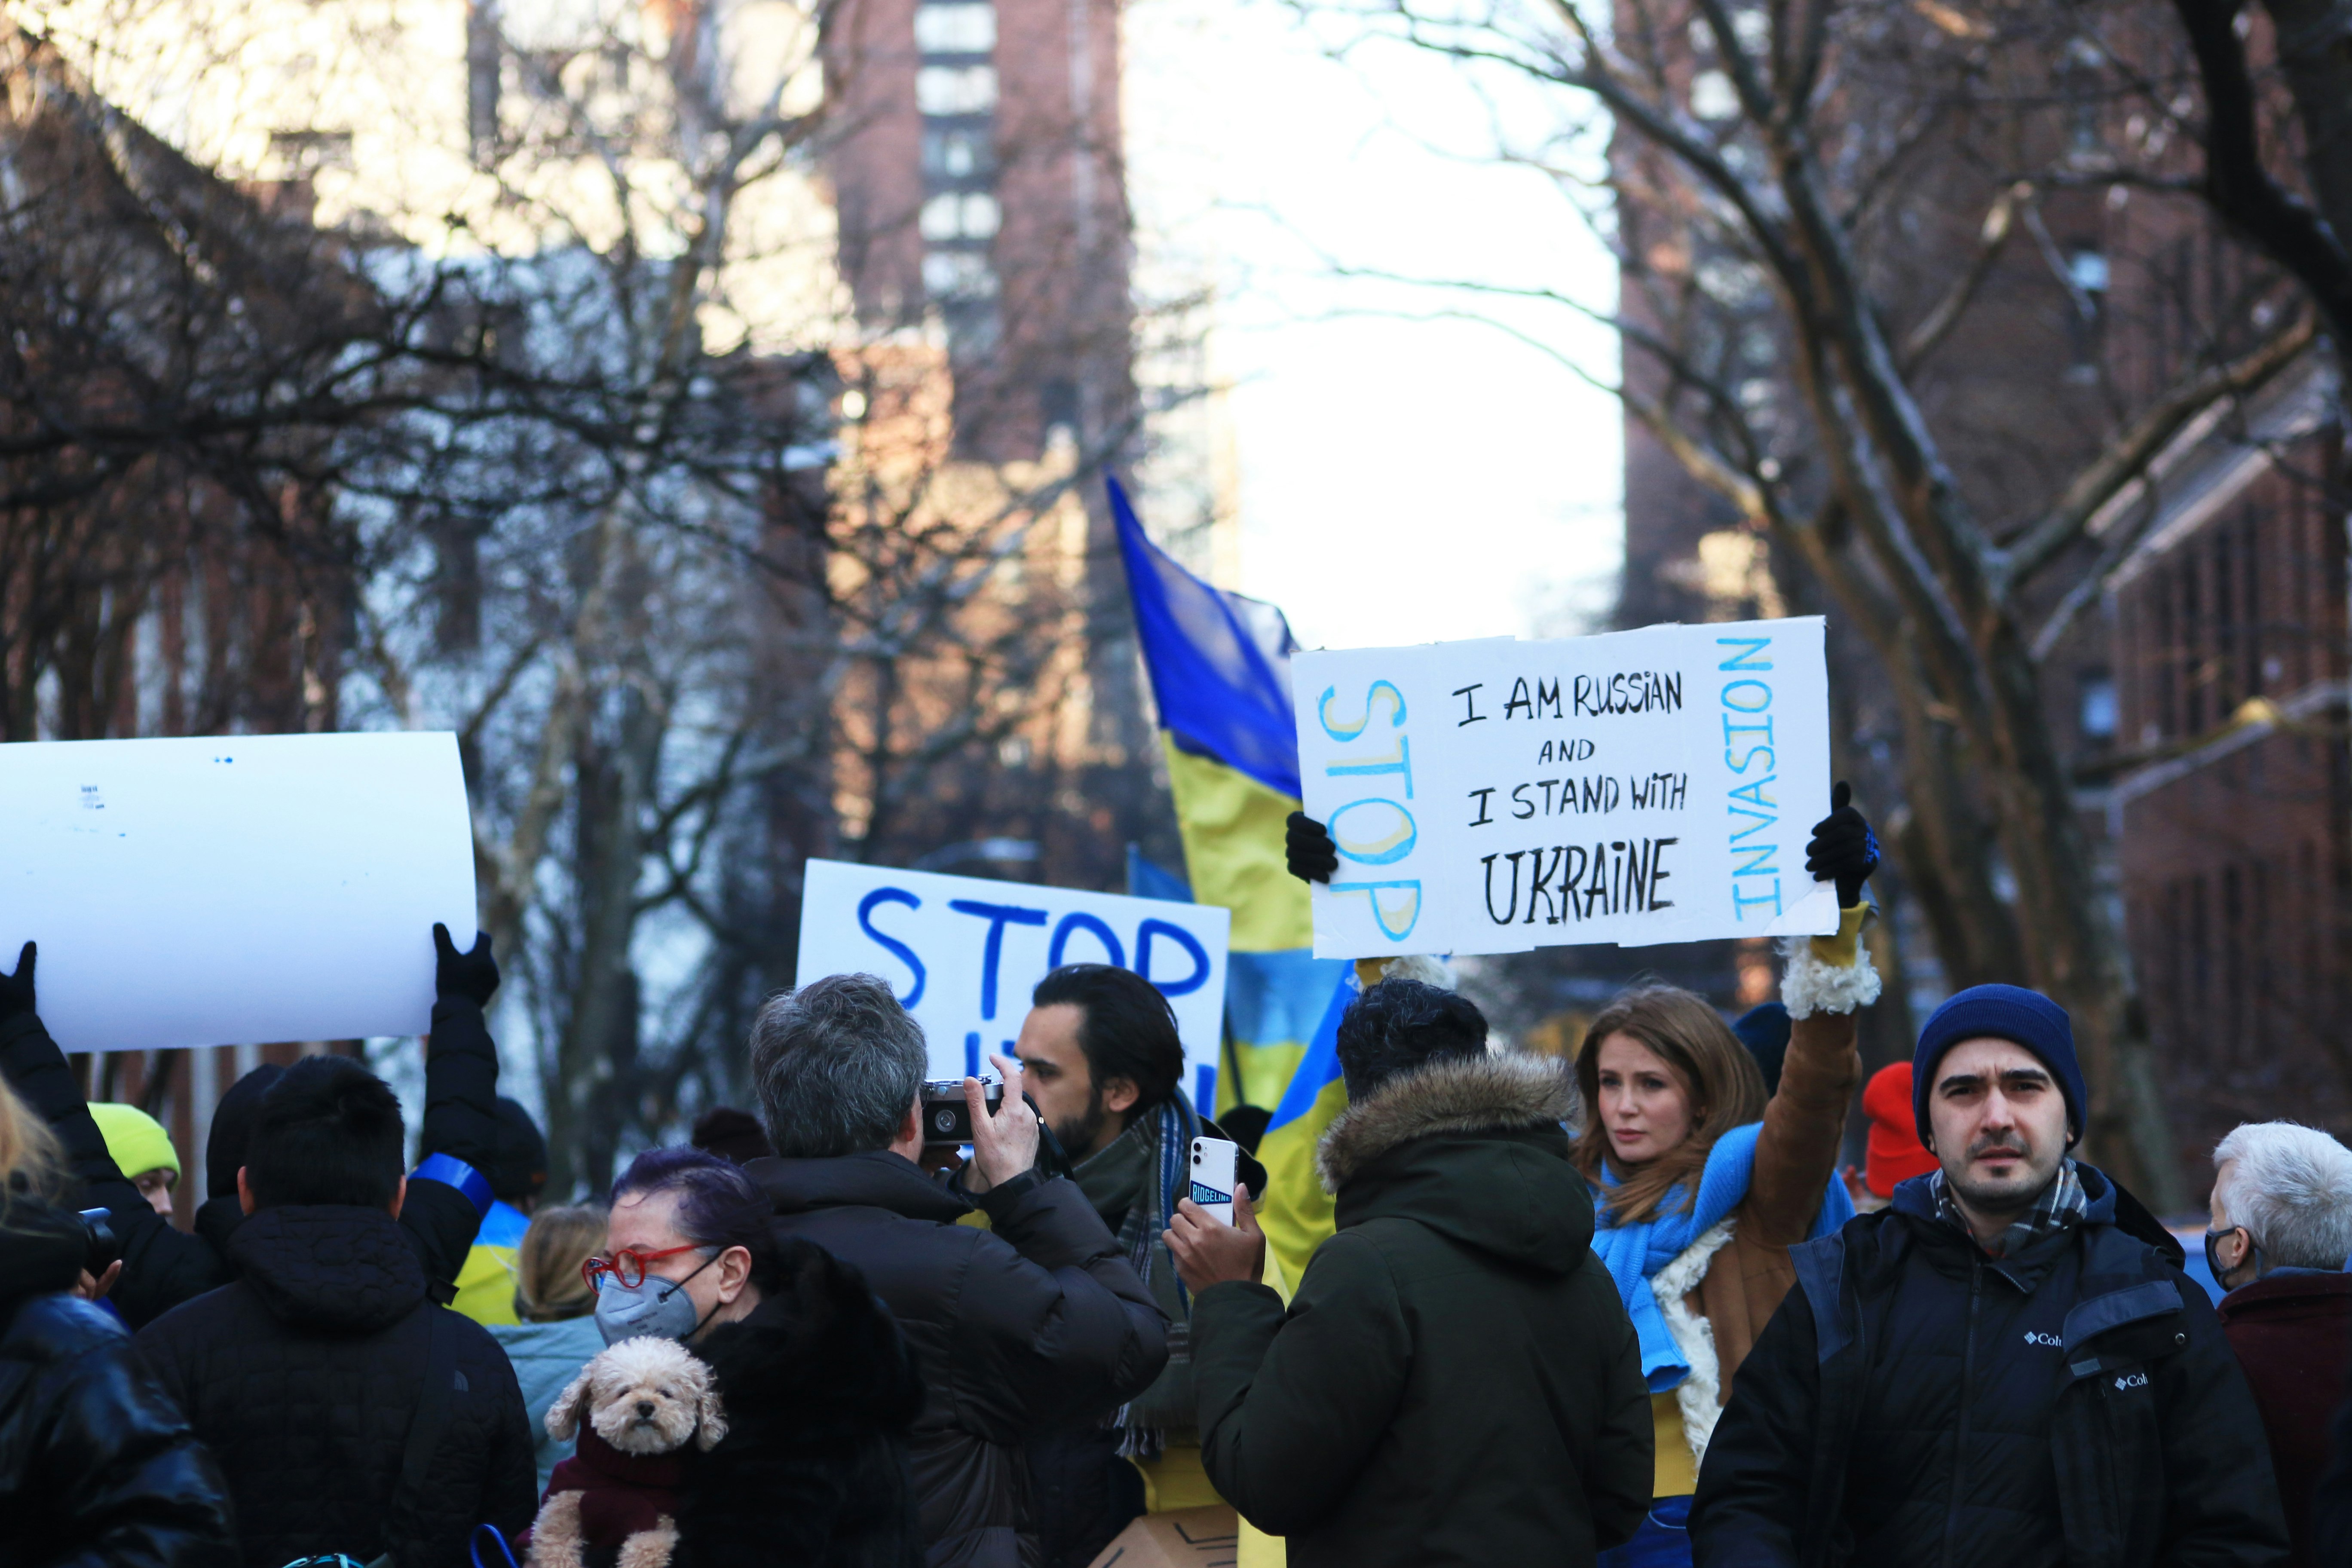 Sunday, February 27, 2022, Protesters gathered outside of Russian Consulate in uptown New York City to protest Russian's invasion in Ukraine. 